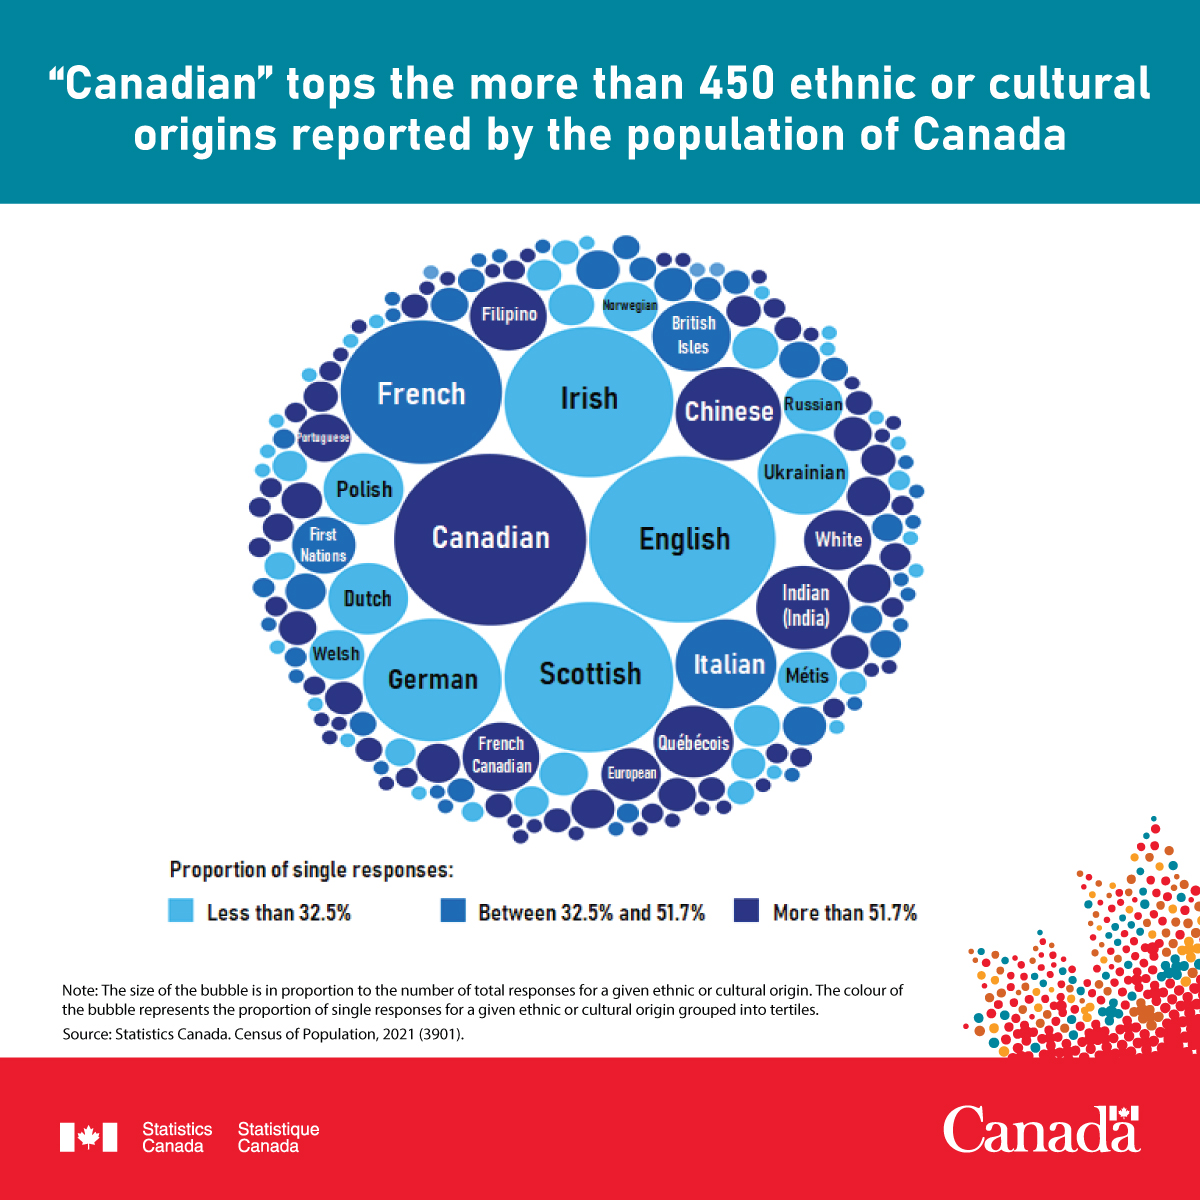 "Canadian" tops the more than 450 ethnic or cultural origins reported by the population of Canada